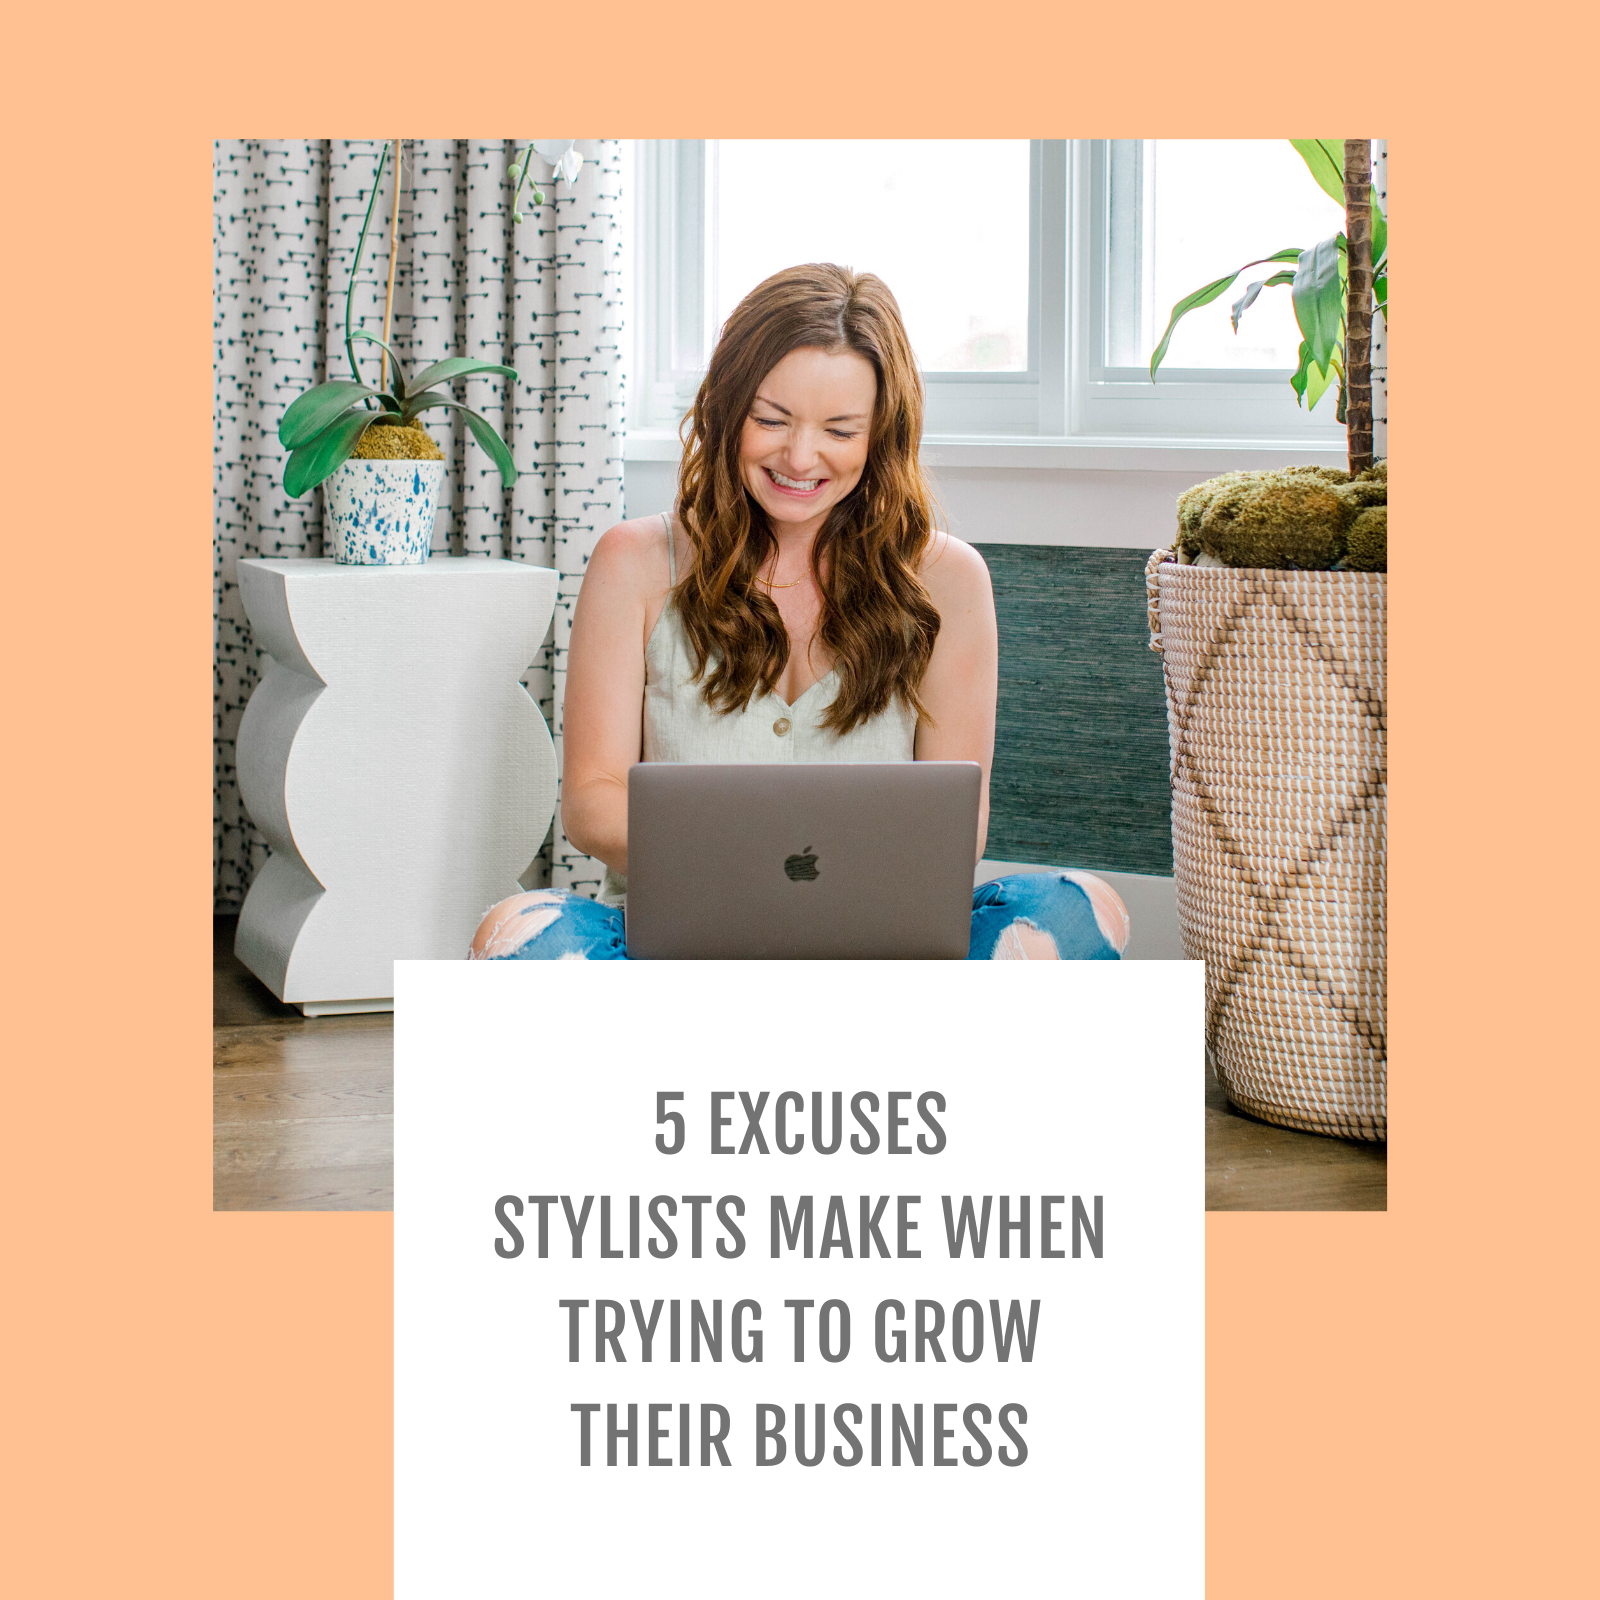 Episode #010: 5 excuses stylists make when trying to grow their business